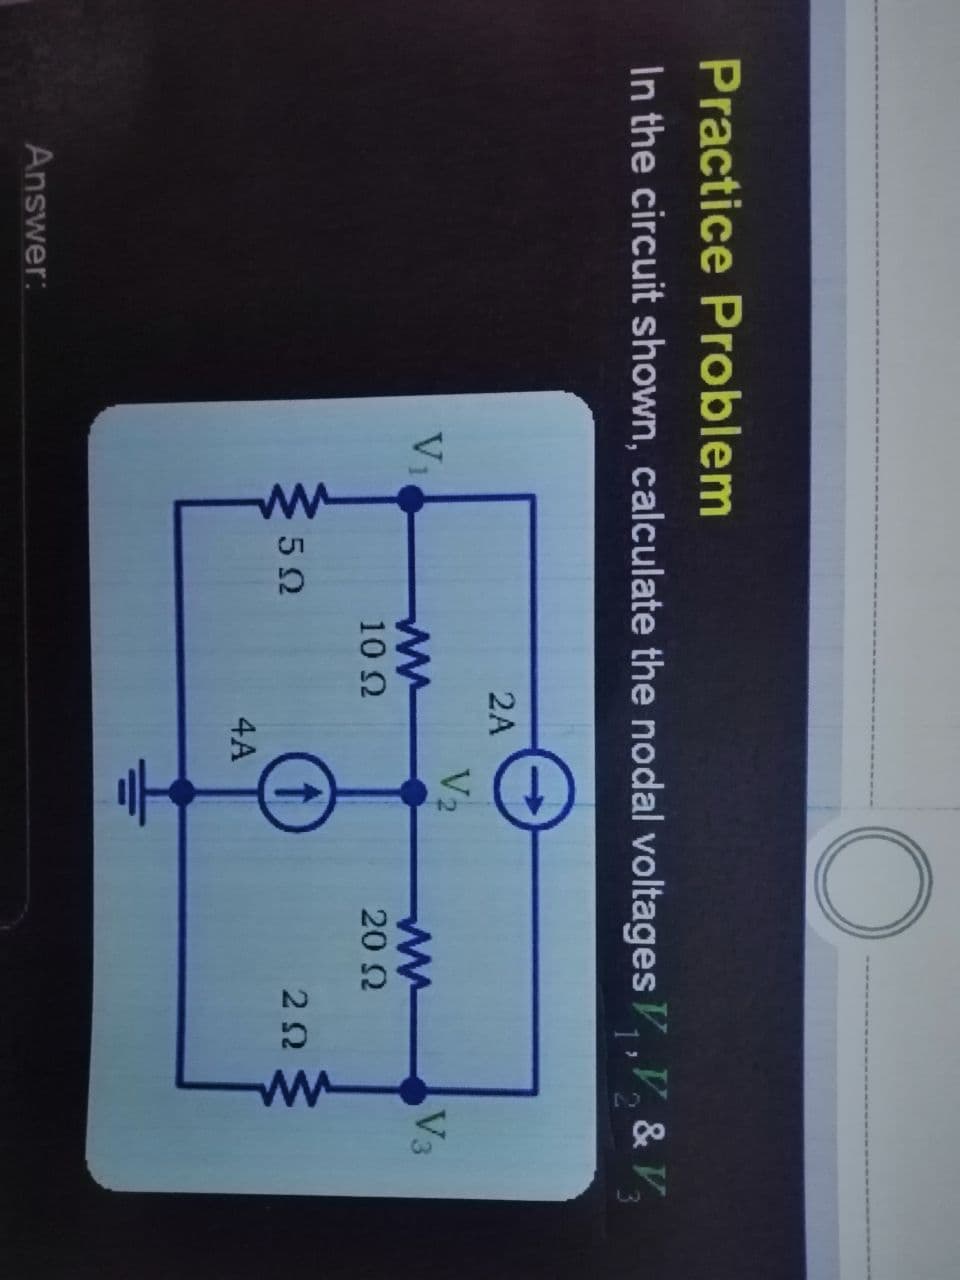 ww
Practice Problem
In the circuit shown, calculate the nodal voltages V, ,V, & V,
1 2
2A
V2
Vi
V3
10 2
20 2
2Ω
4A
Answer:
